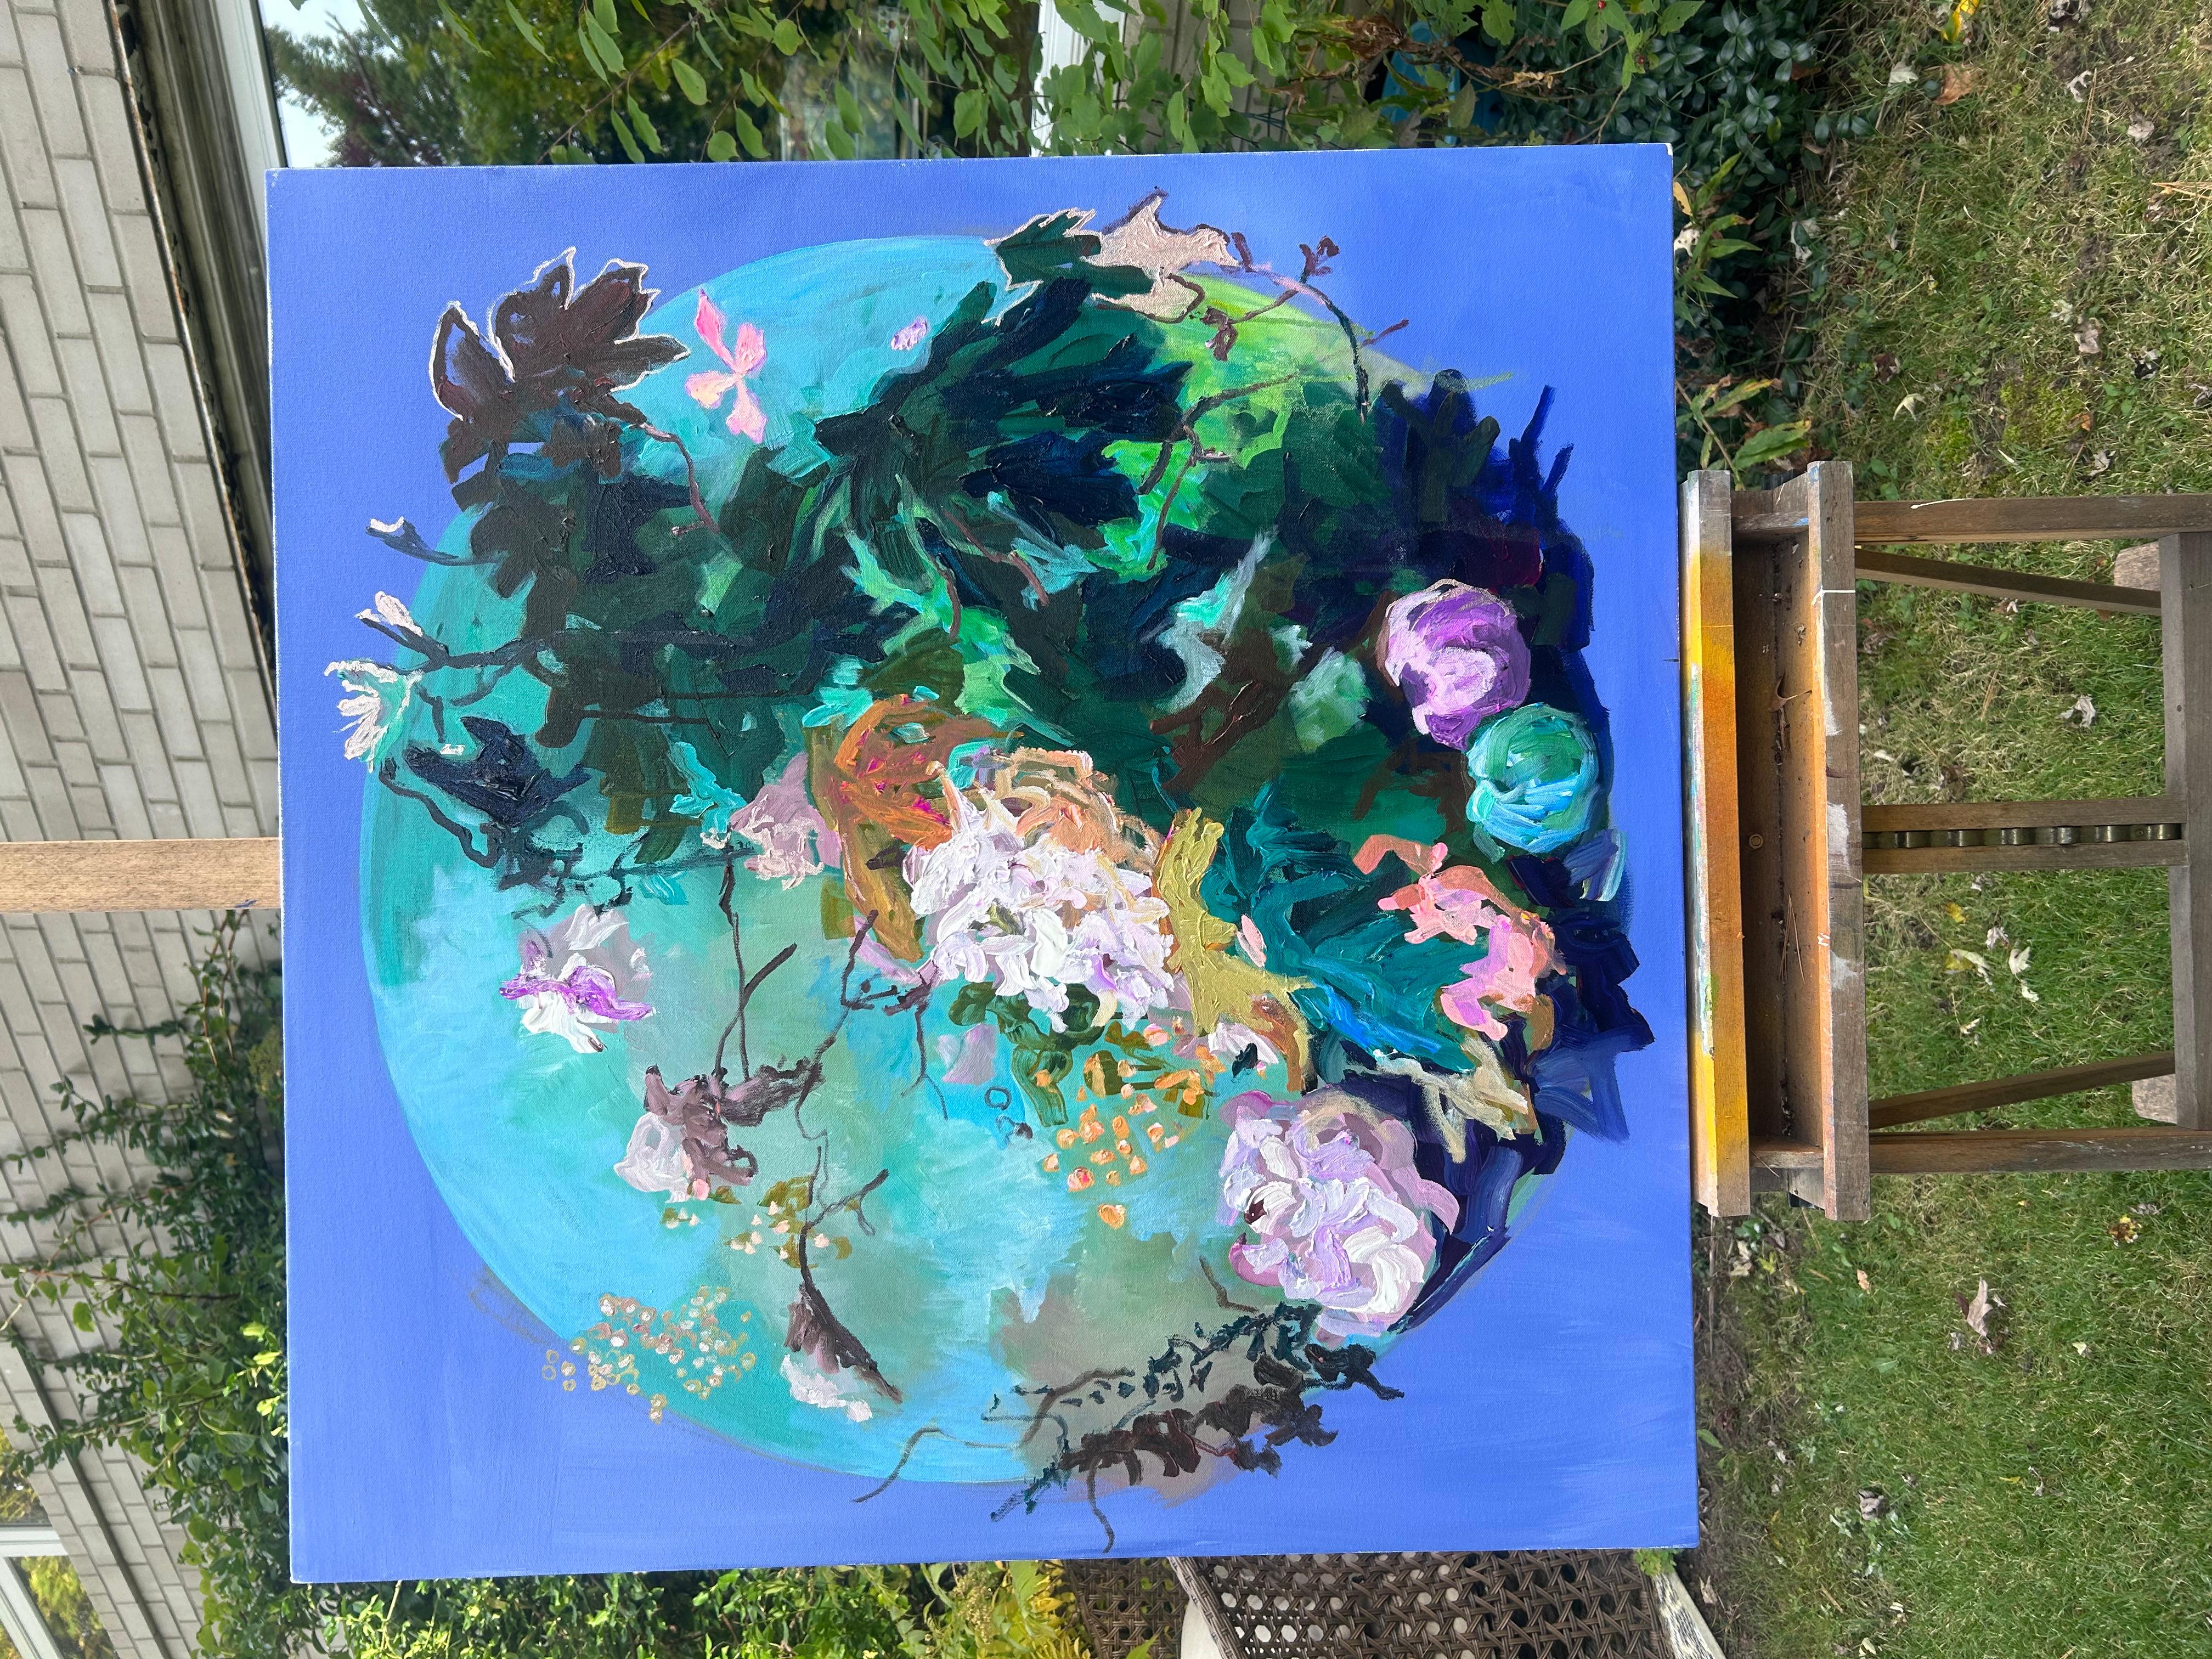 <p>Artist Comments<br>The painting beautifully captures a blue globe adorned with an array of plants and flowers. The enchanting hues of light magenta and dark green create organic arrangements that draw the viewer into a realm of wonder. According